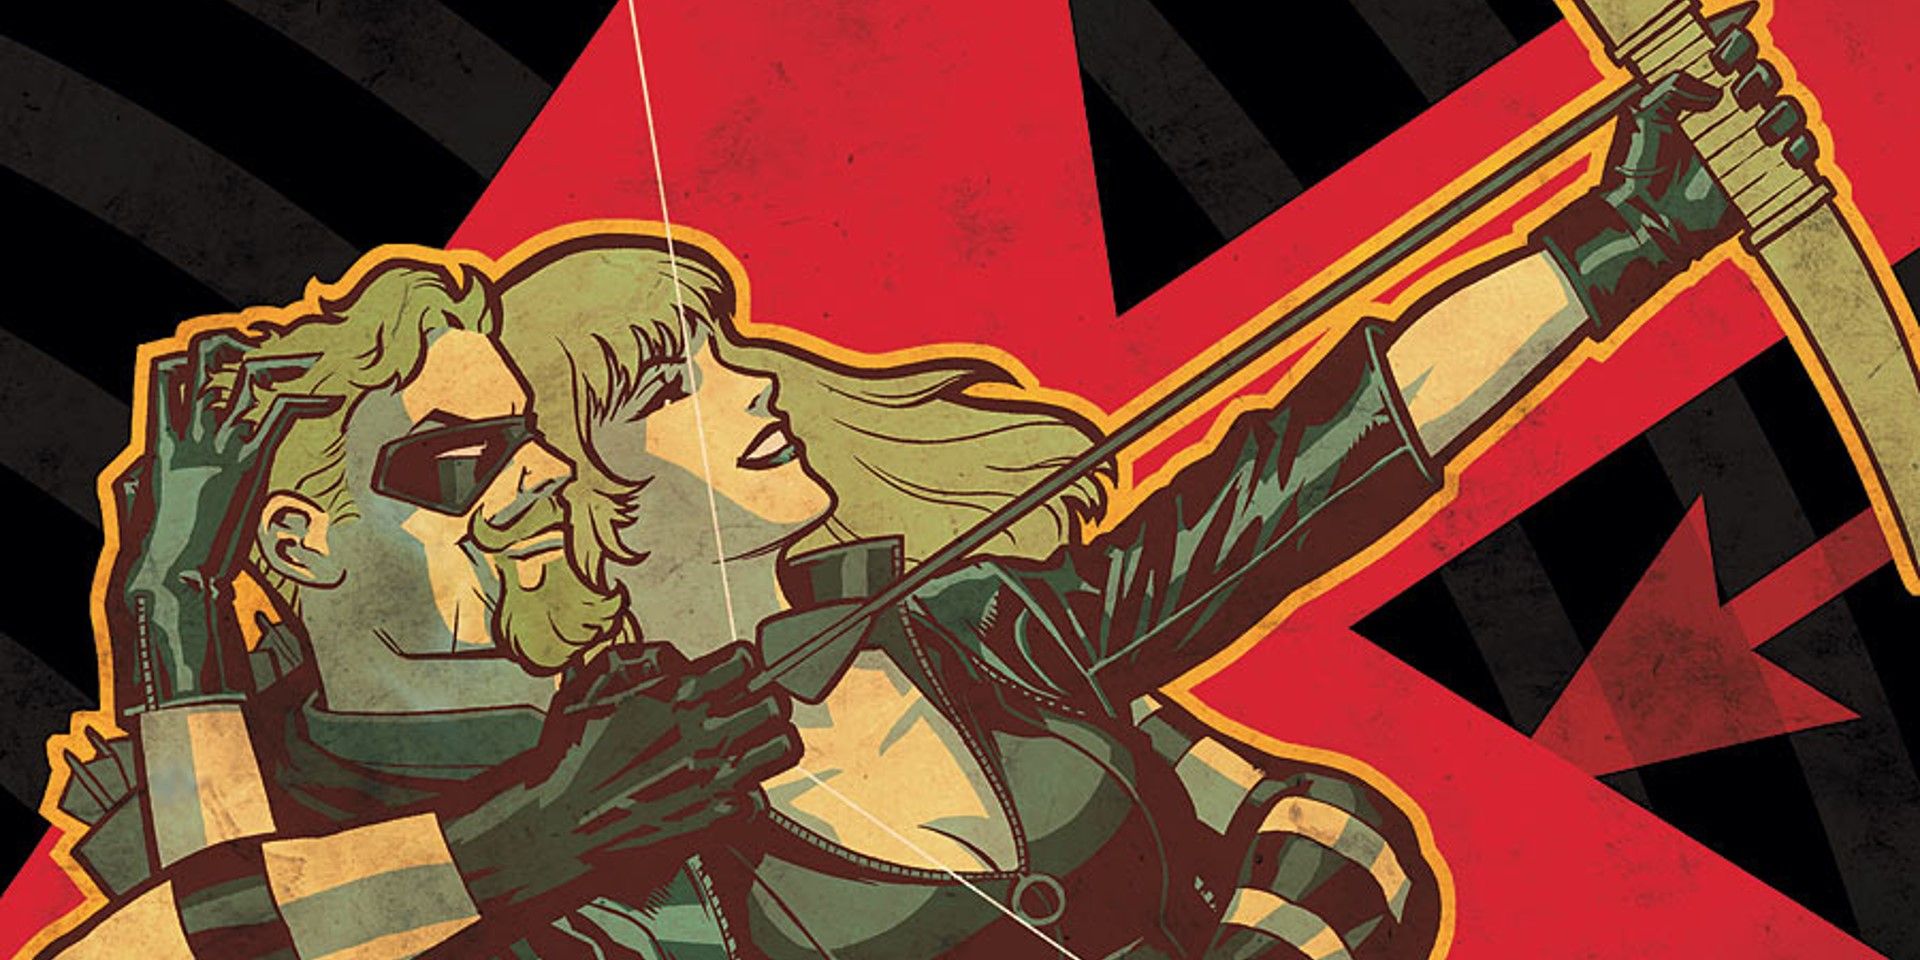 Green Arrow and Black Canary shoot an arrow together in DC Comics